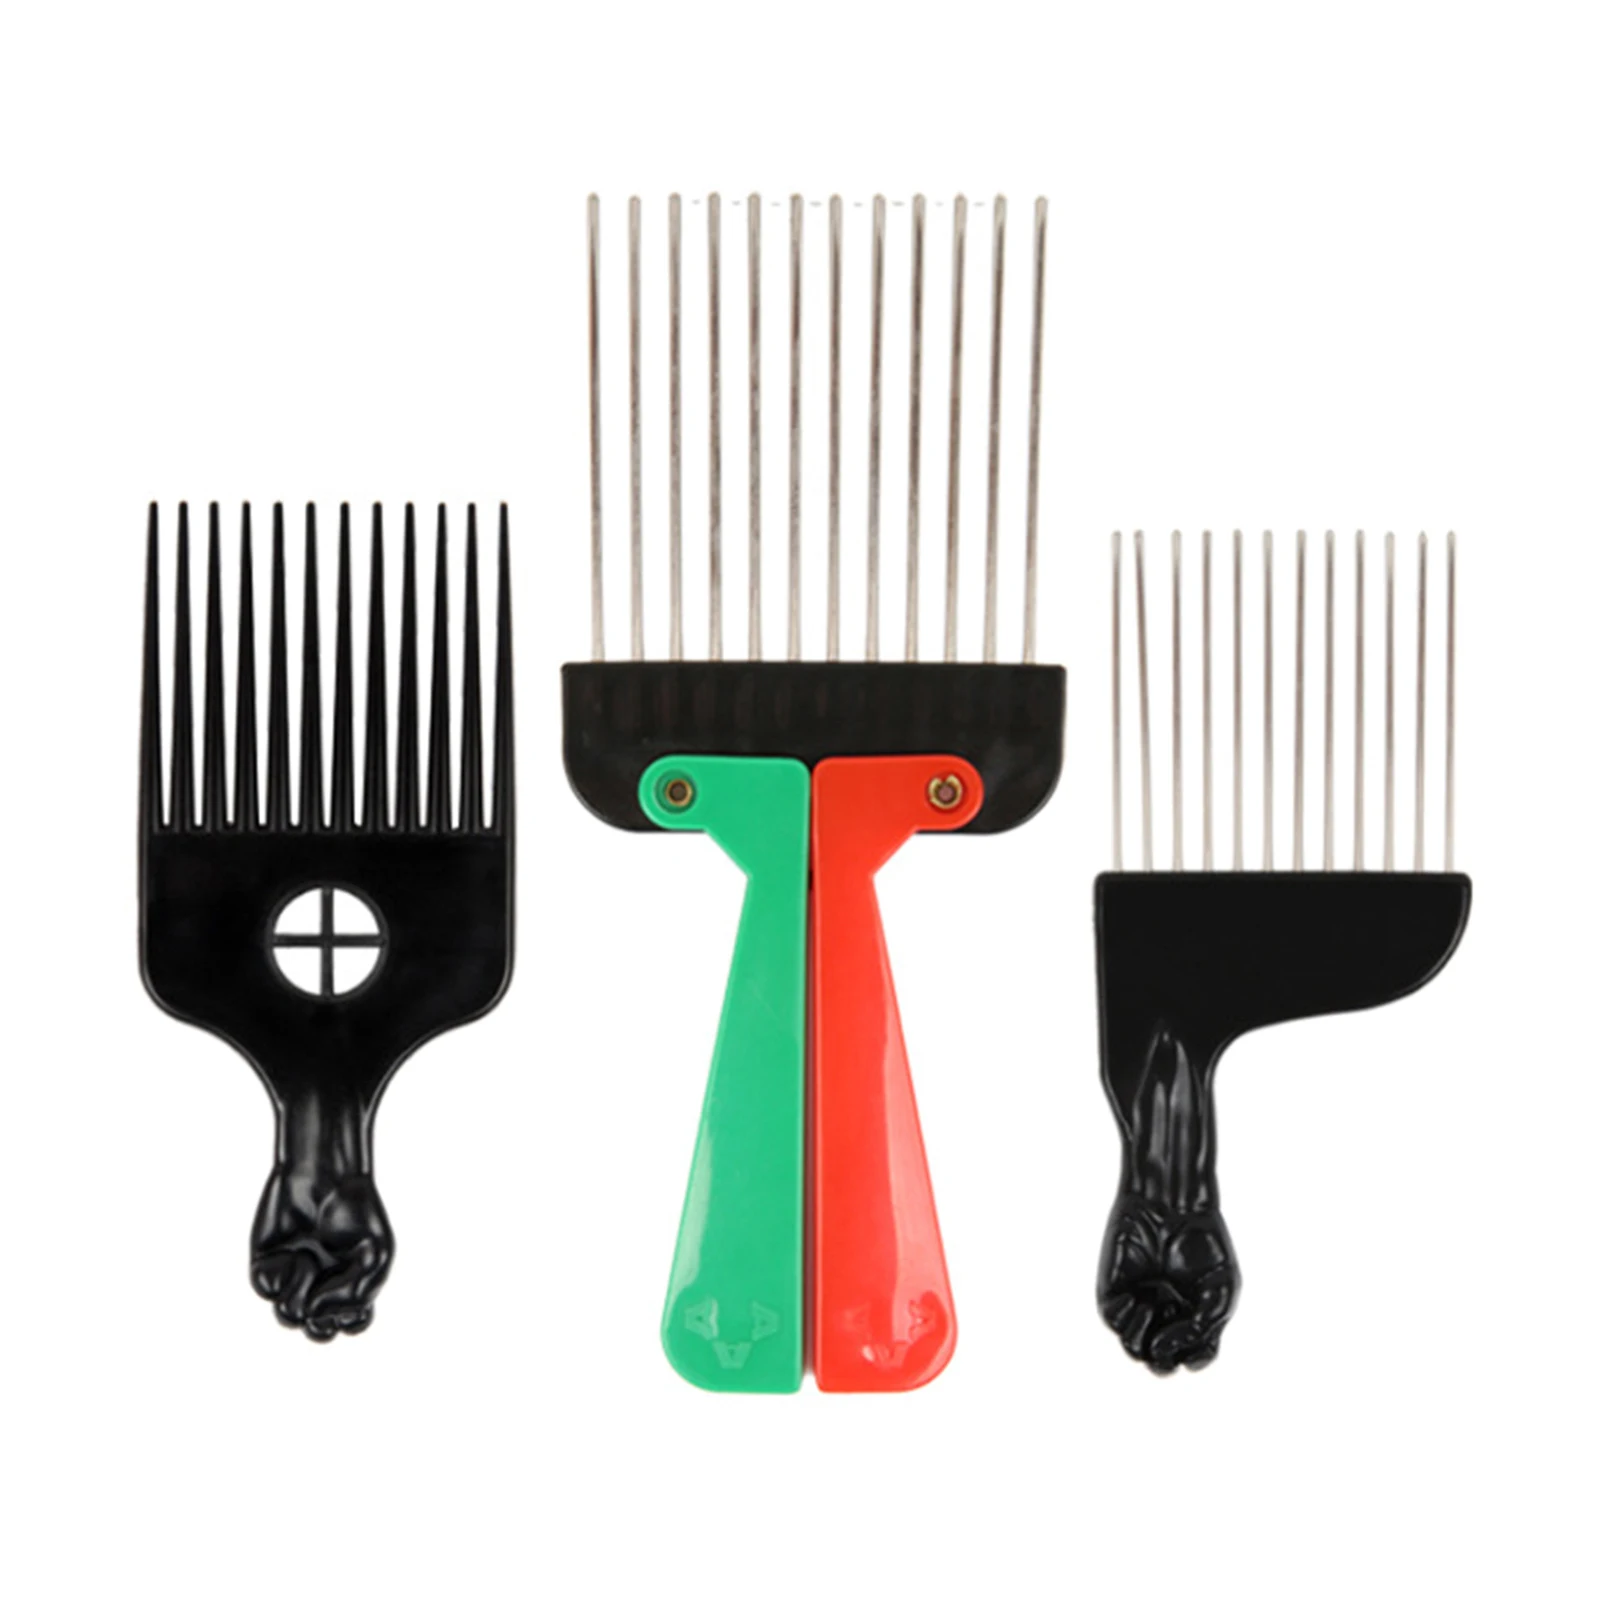 Afro Hair Pick for Hair Styling with Colour Foldable Handle for Salon